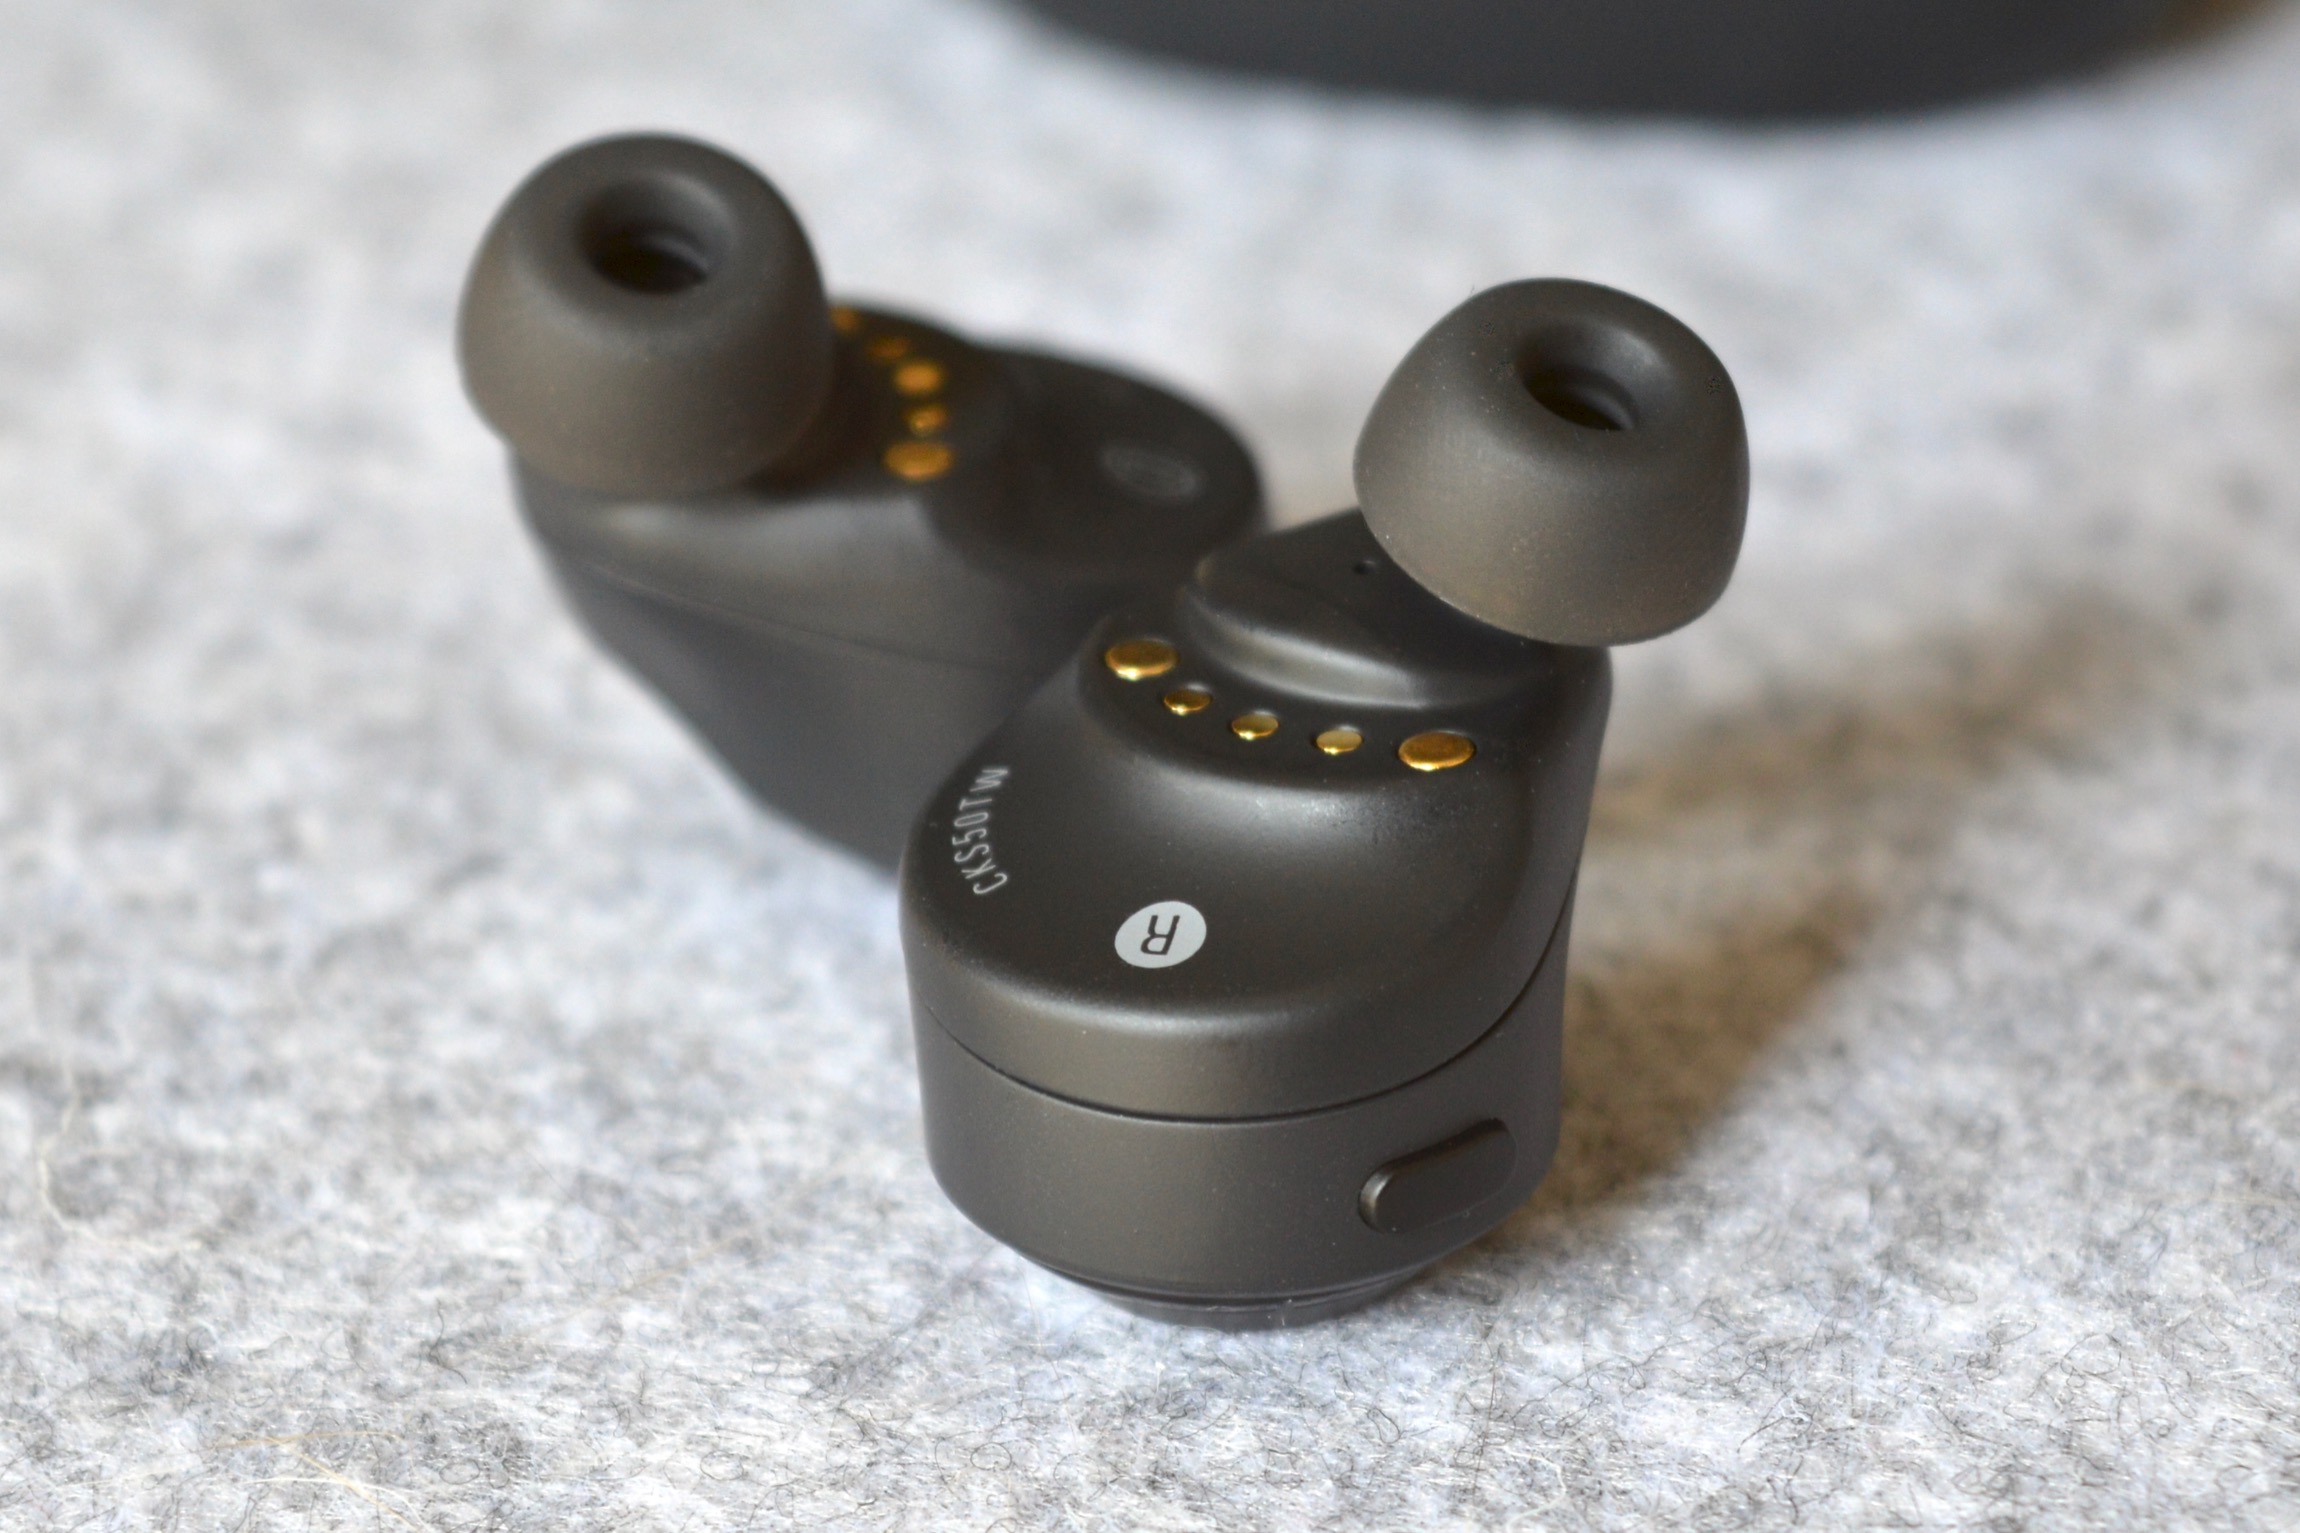 Audio-Technica ATH-CKS50TW review: True wireless value kings